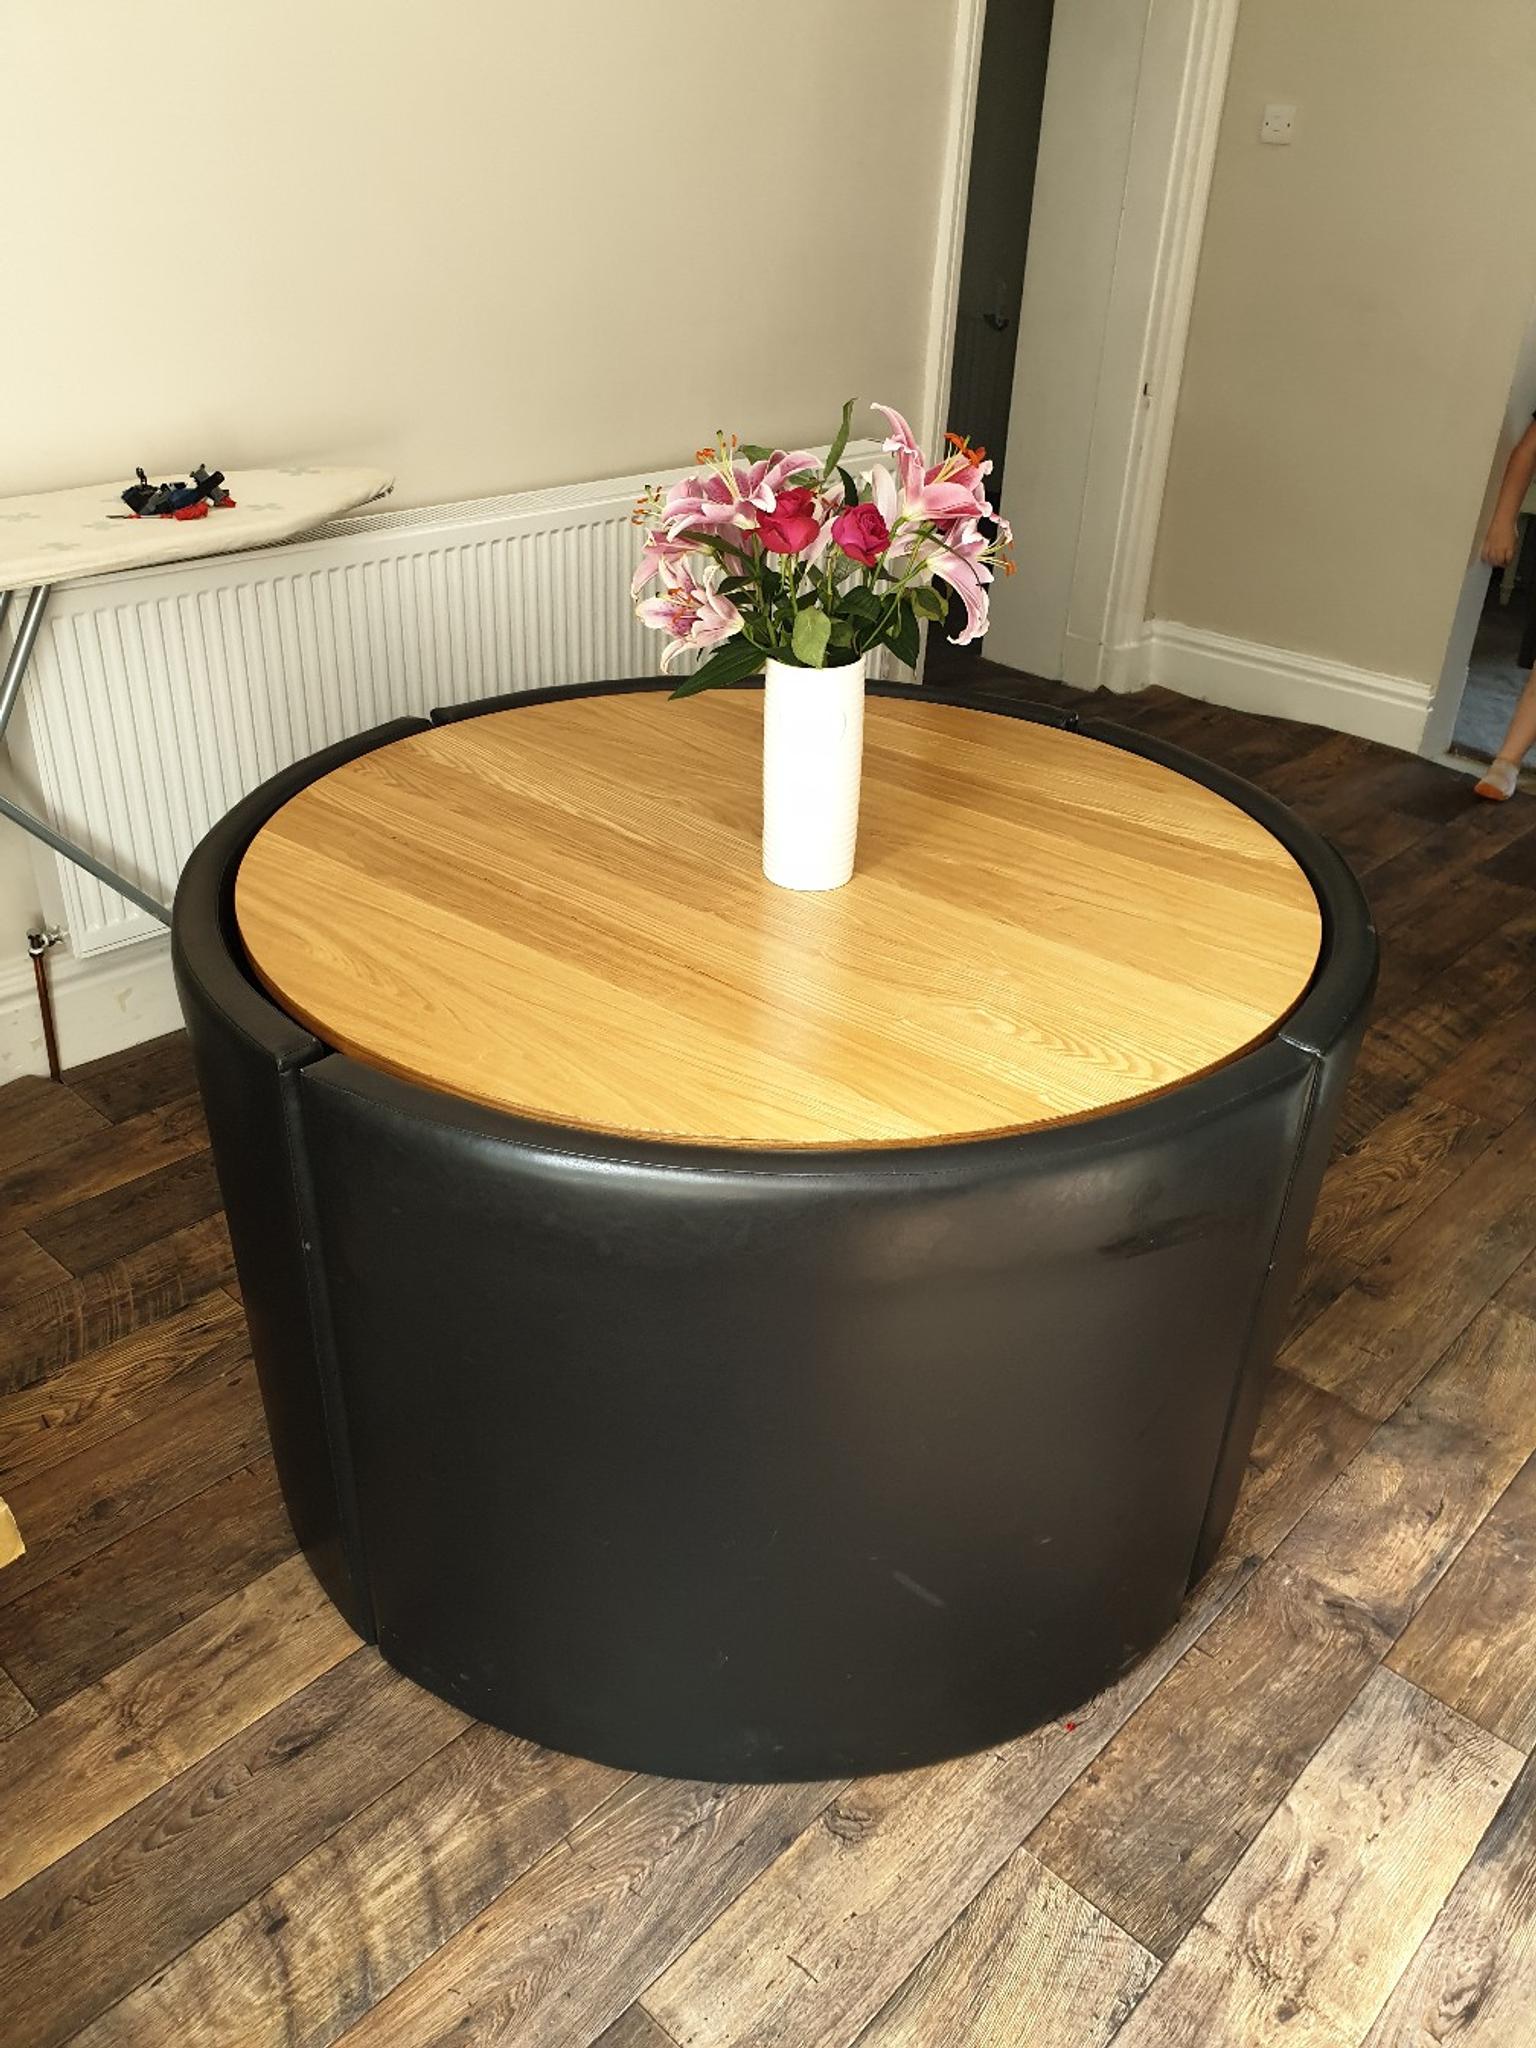 Round Space Saver Dining Table In Hyndburn For 40 00 For Sale Shpock